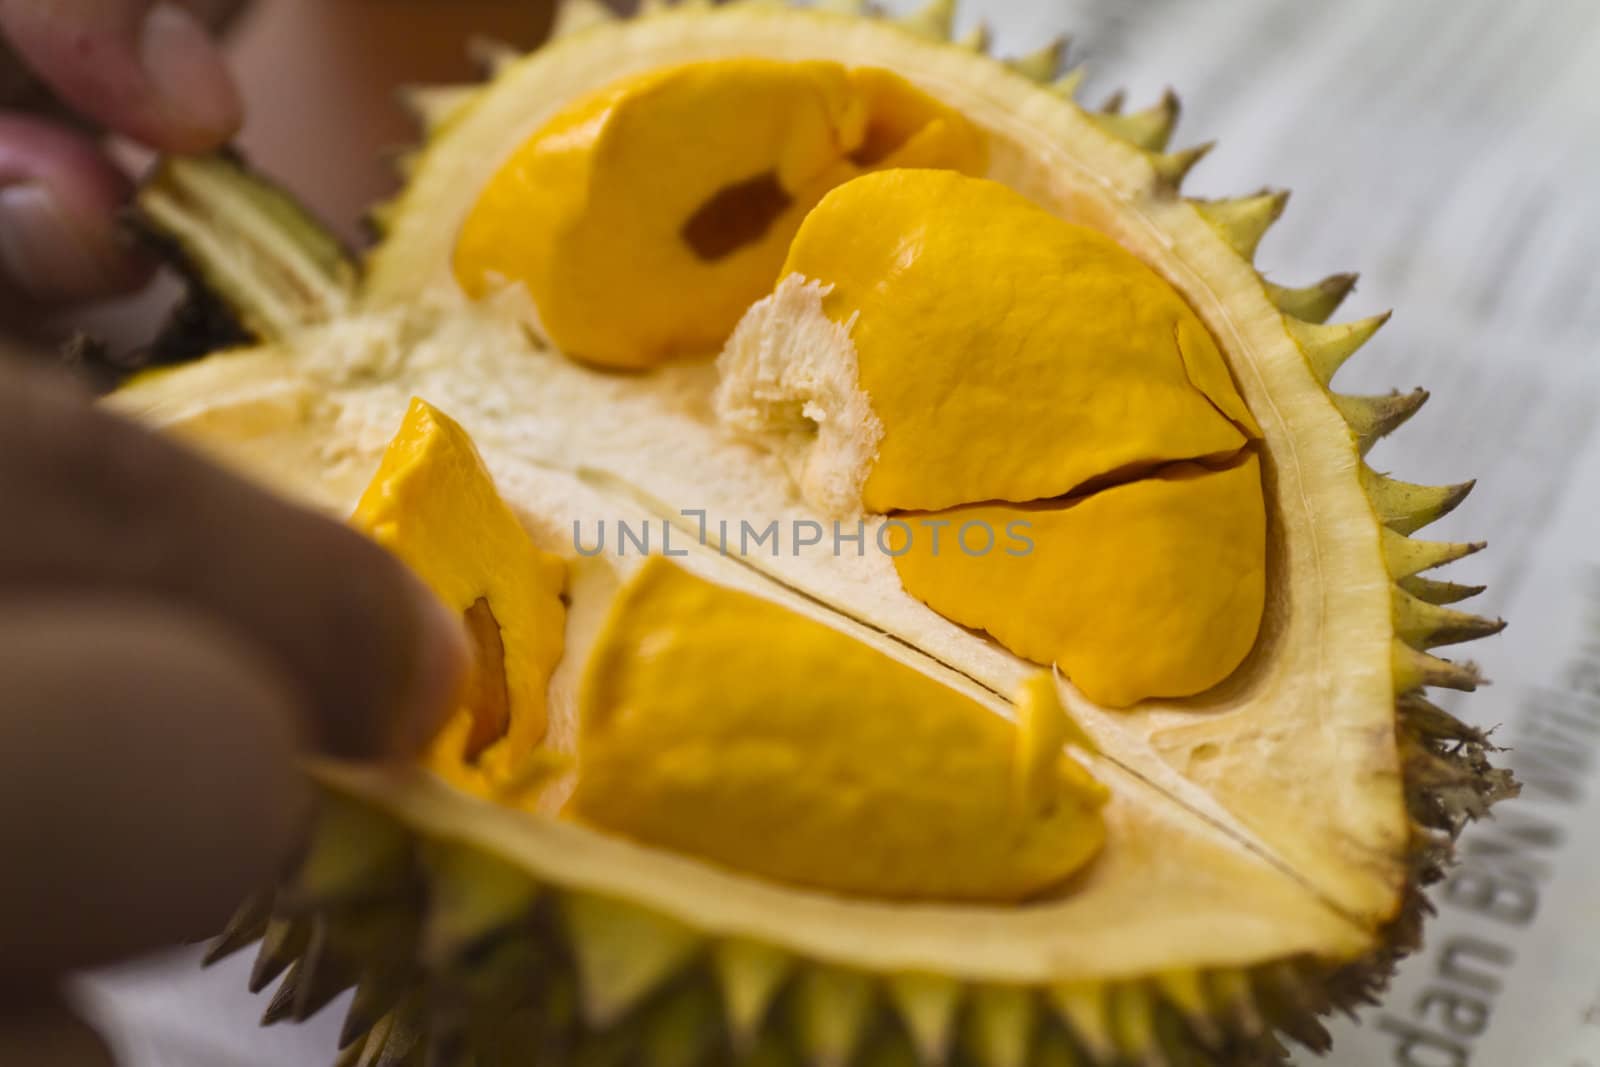 taking on a  delicious yellow durian flesh